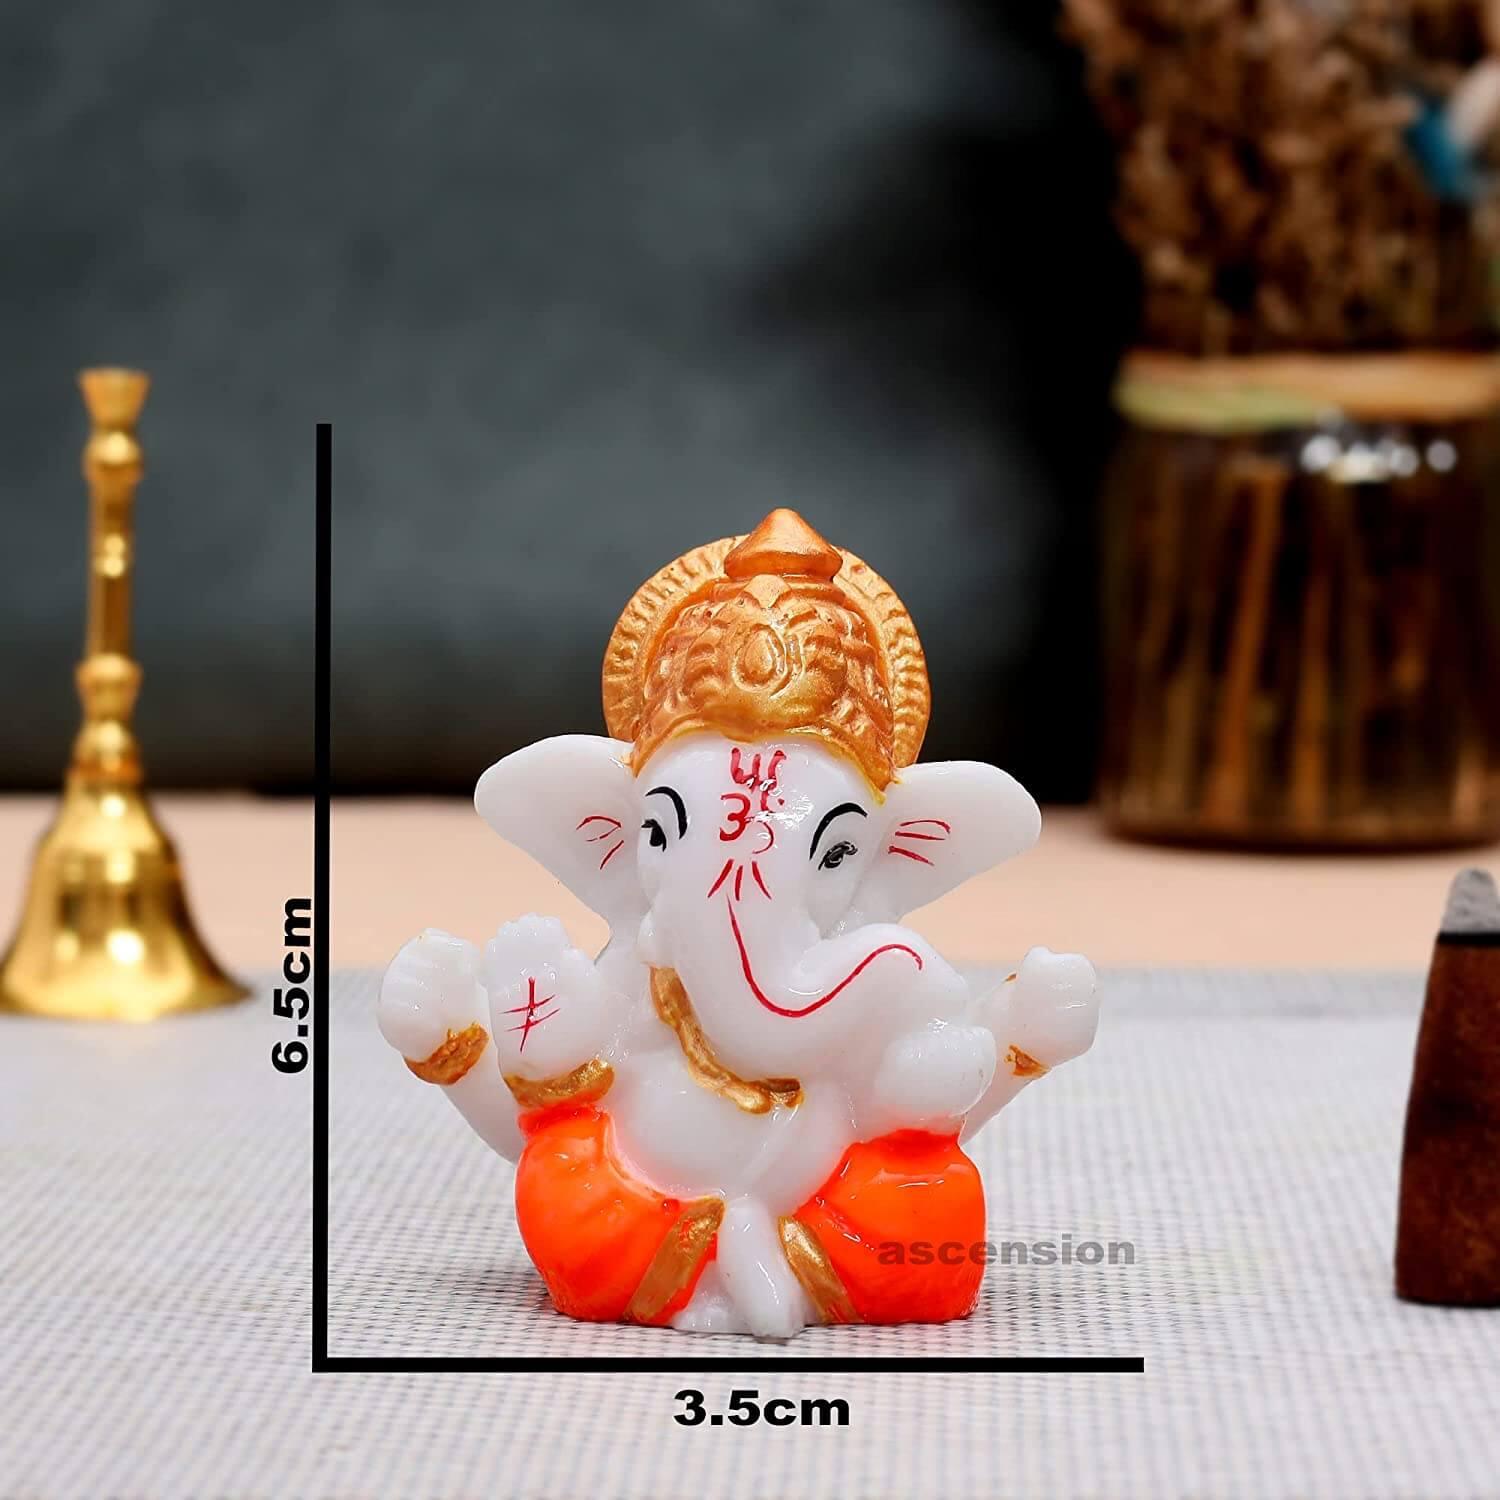 Divine Lord Ganesha Idol: Gift/Send Home and Living Gifts Online JVS1176766  |IGP.com